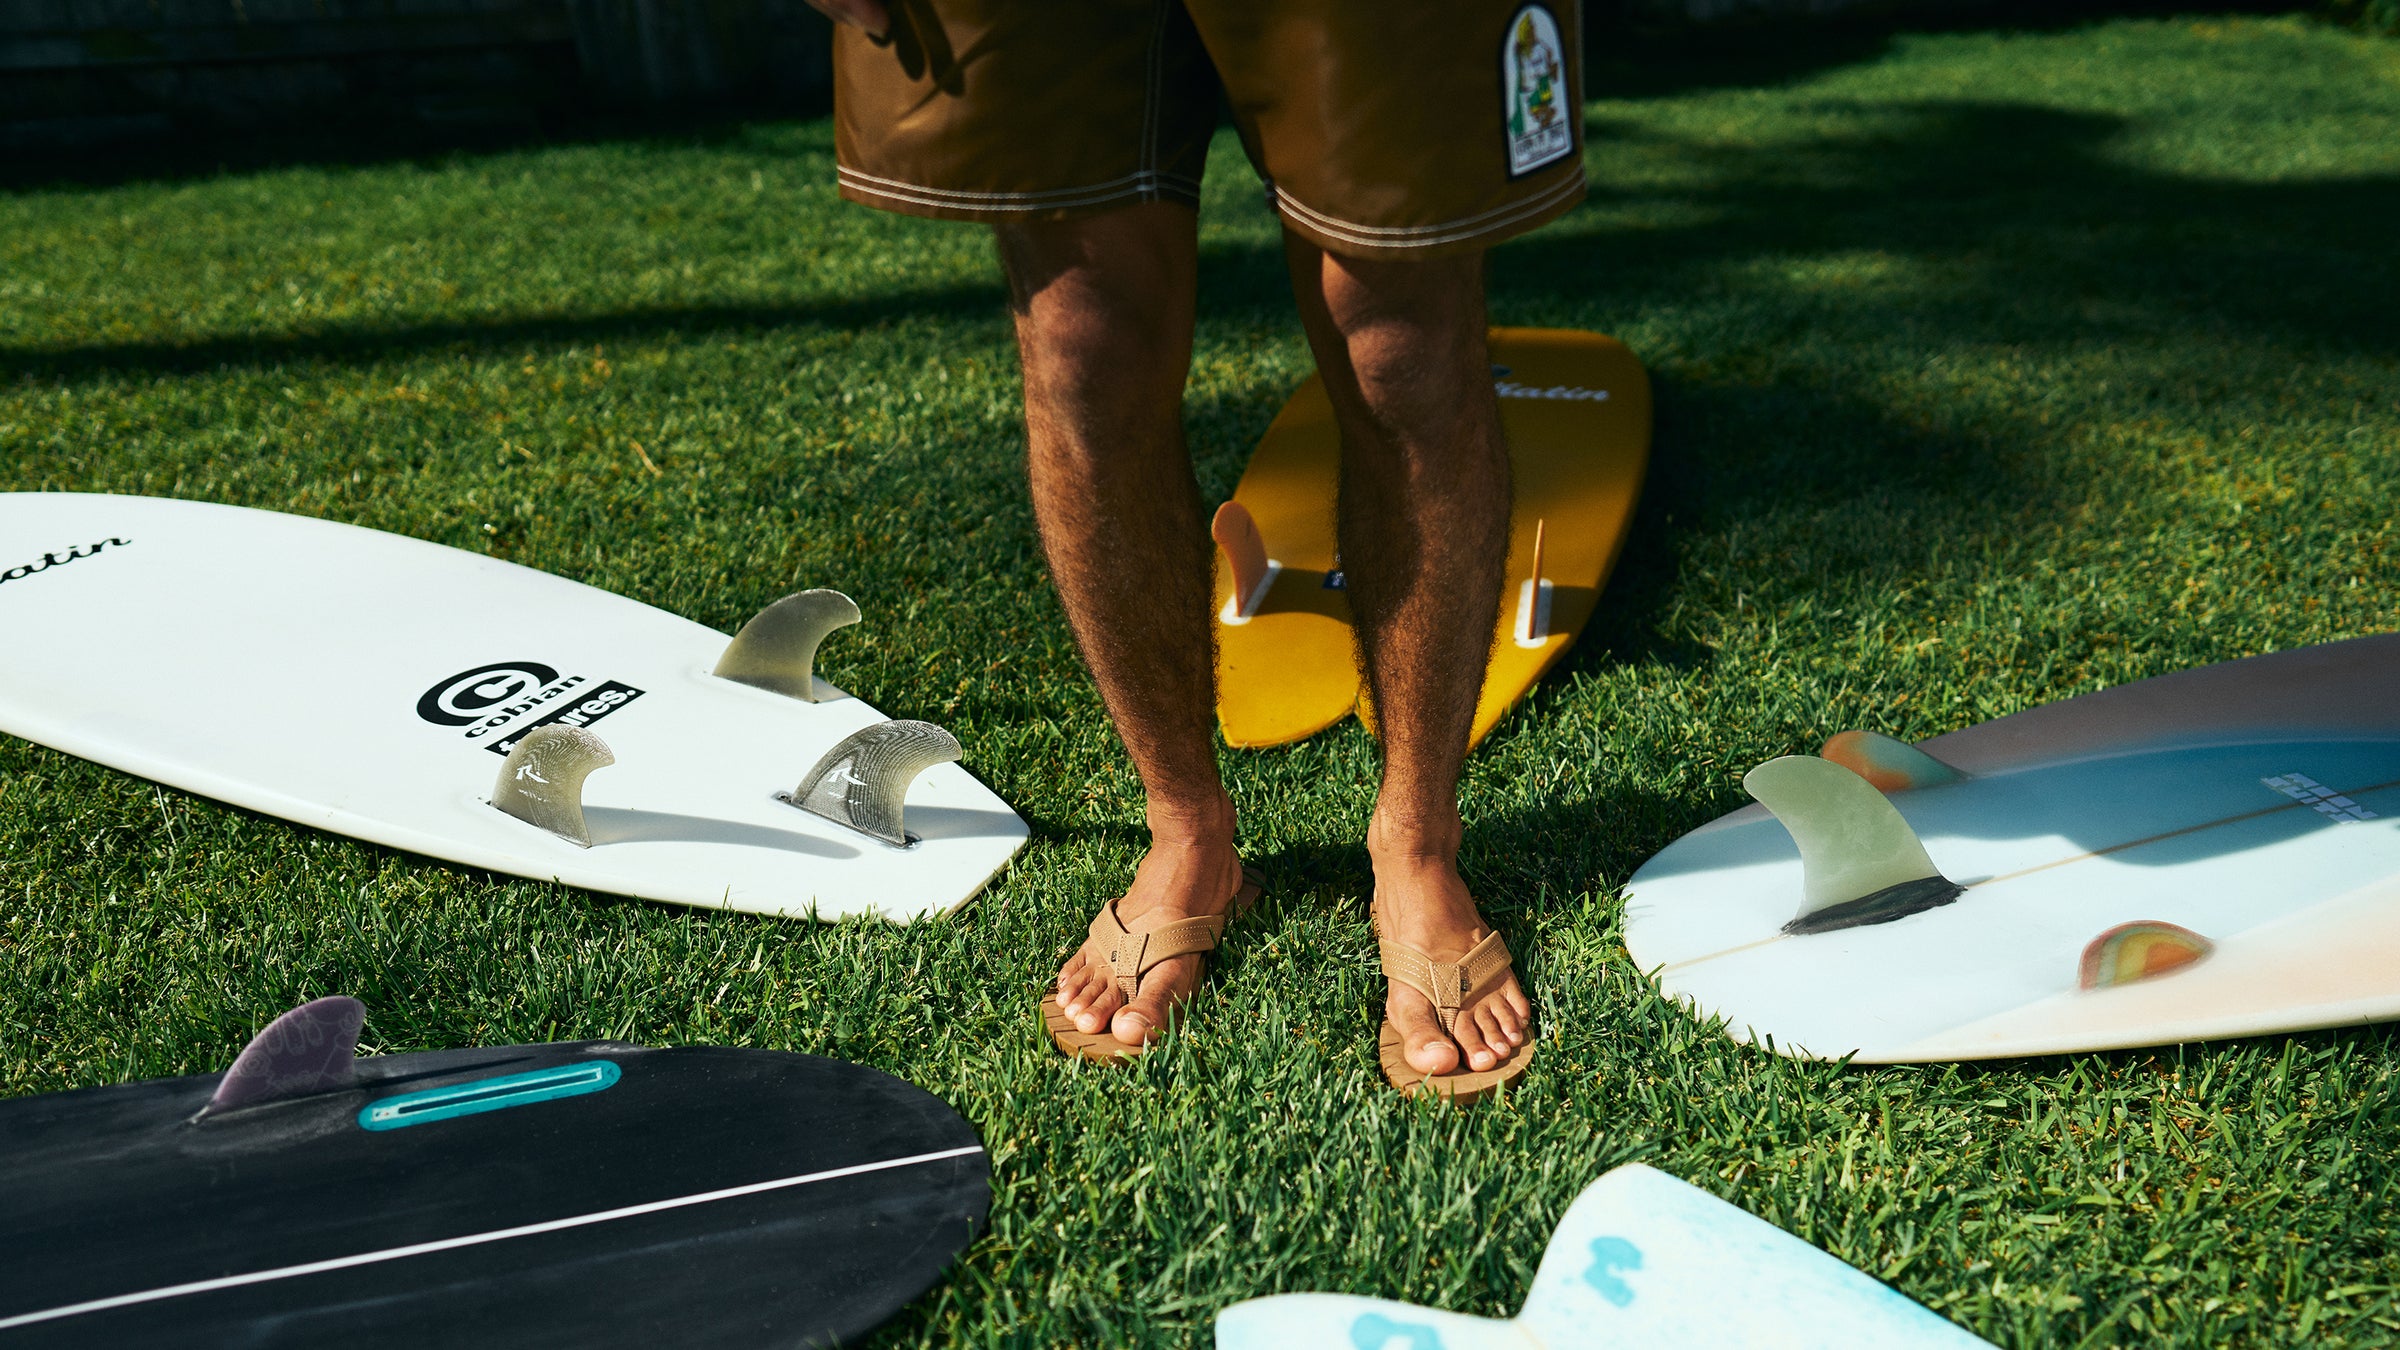 Model wearing Las Olas 2 is standing in grass surrounded by surfboards #color_tan